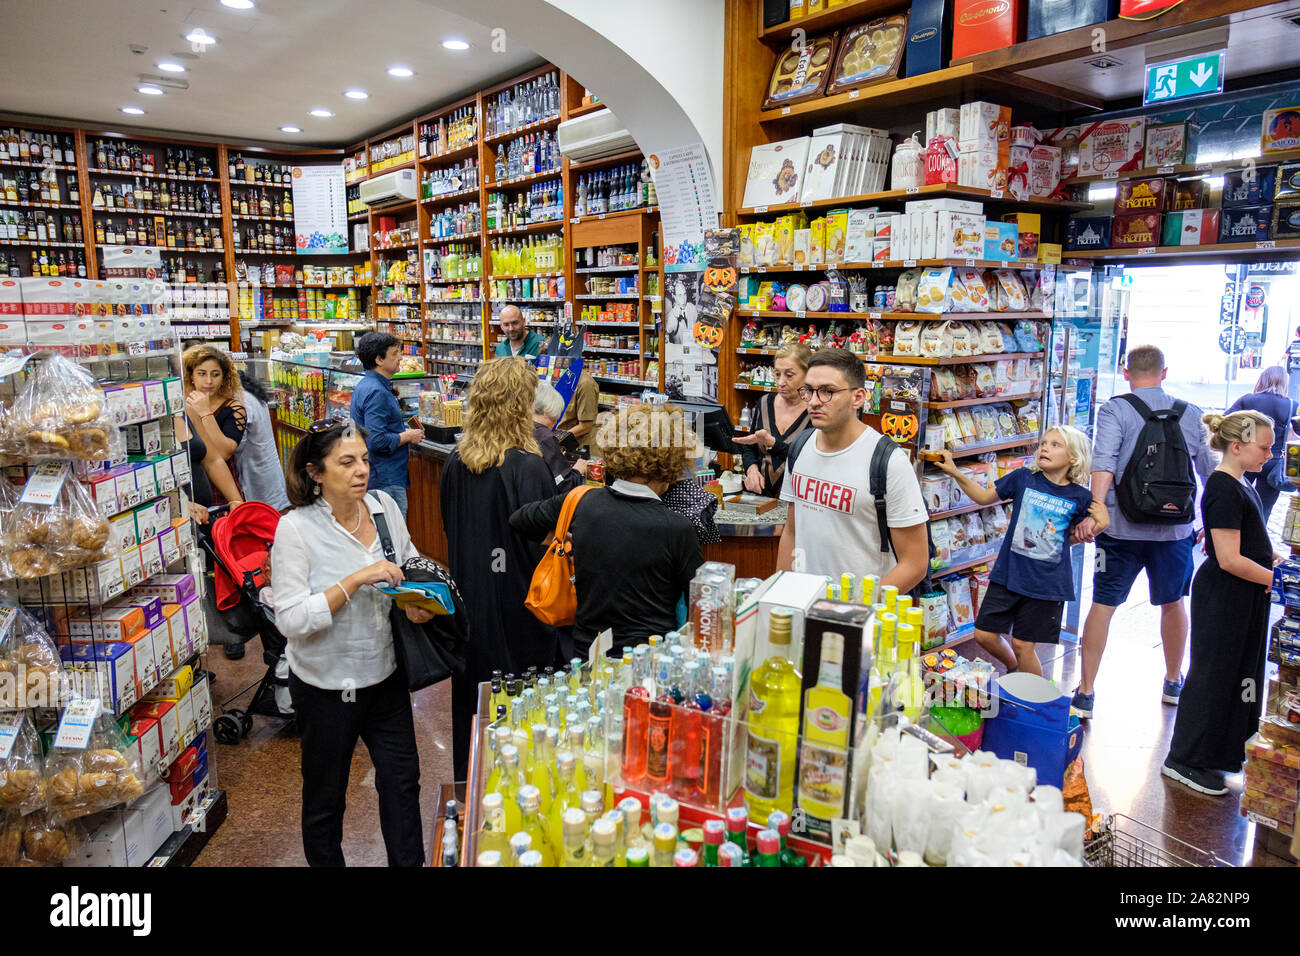 Castroni Caffe grocery store, supermarket, market, selling traditional Italian products, Prati District, Rome, Italy Stock Photo